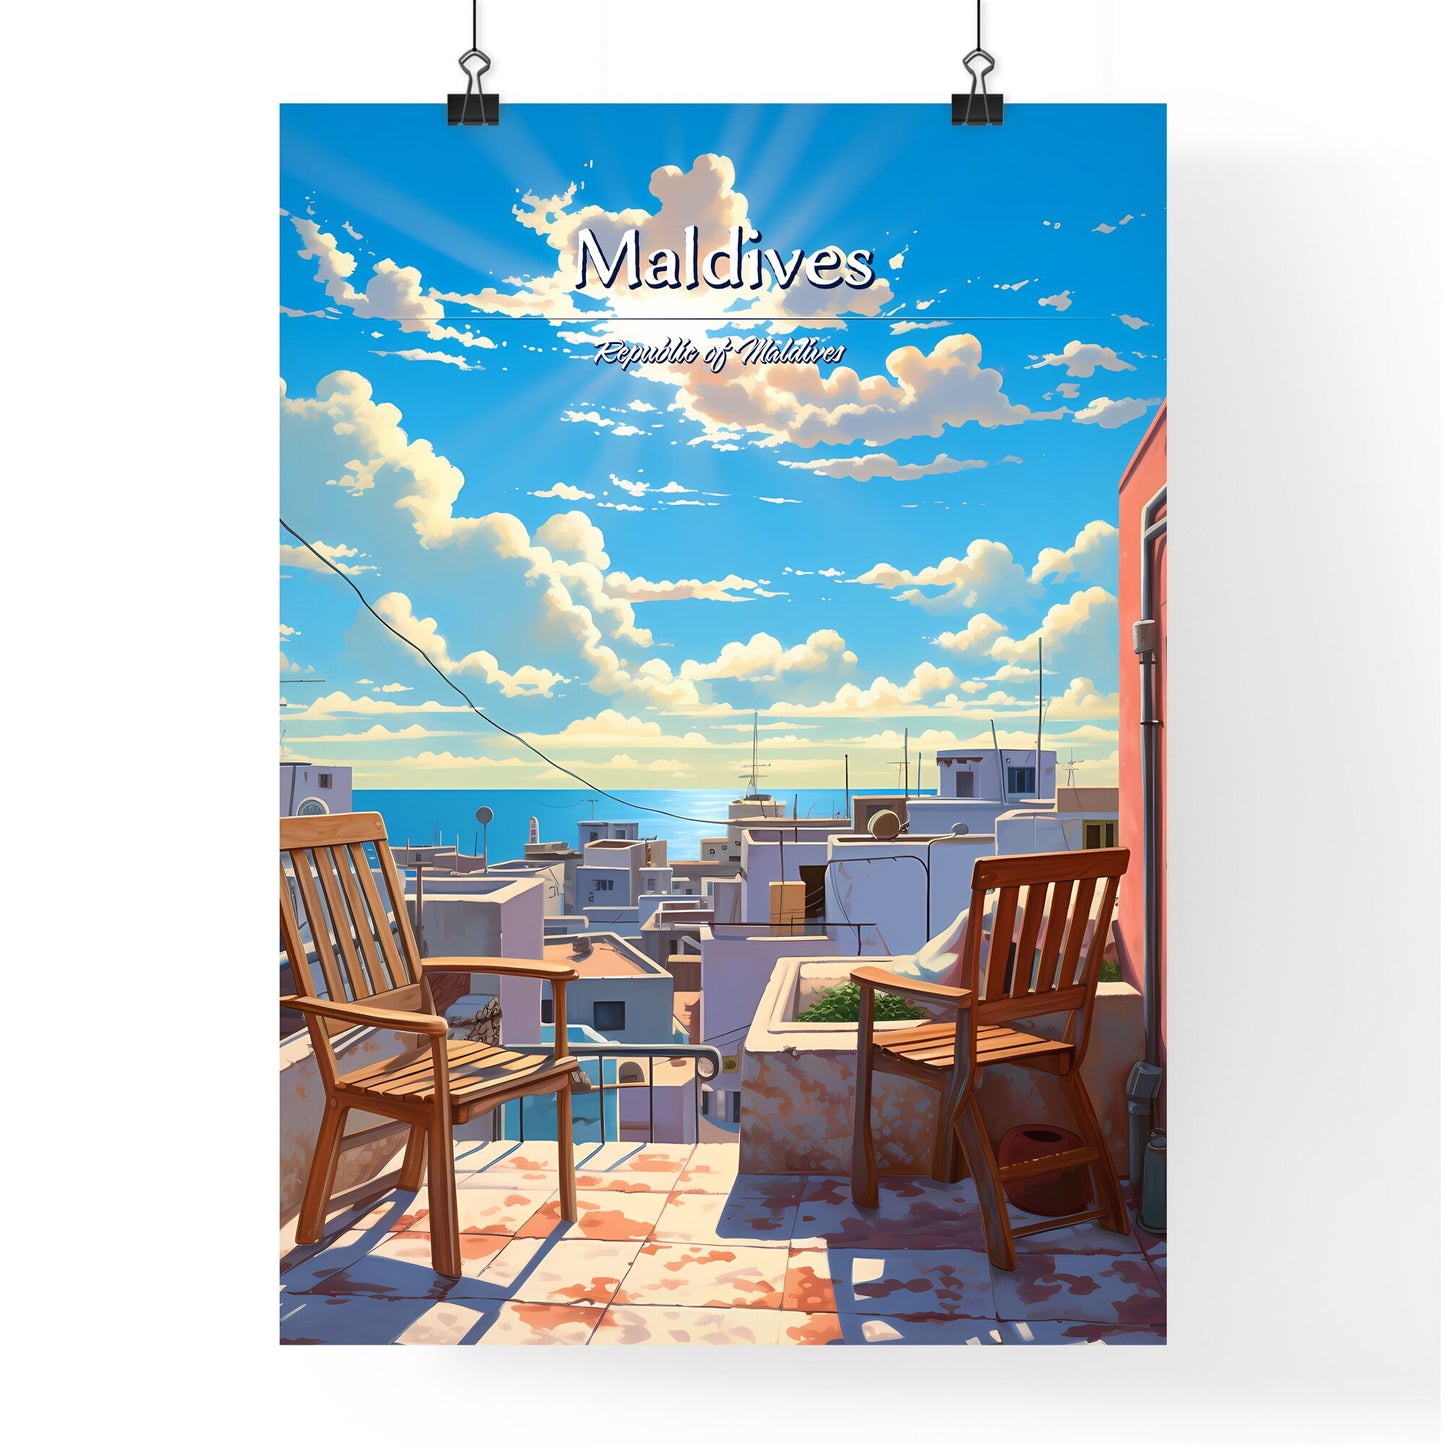 On the roofs of Maldives, Republic of Maldives - Art print of a two chairs on a rooftop overlooking a city Default Title